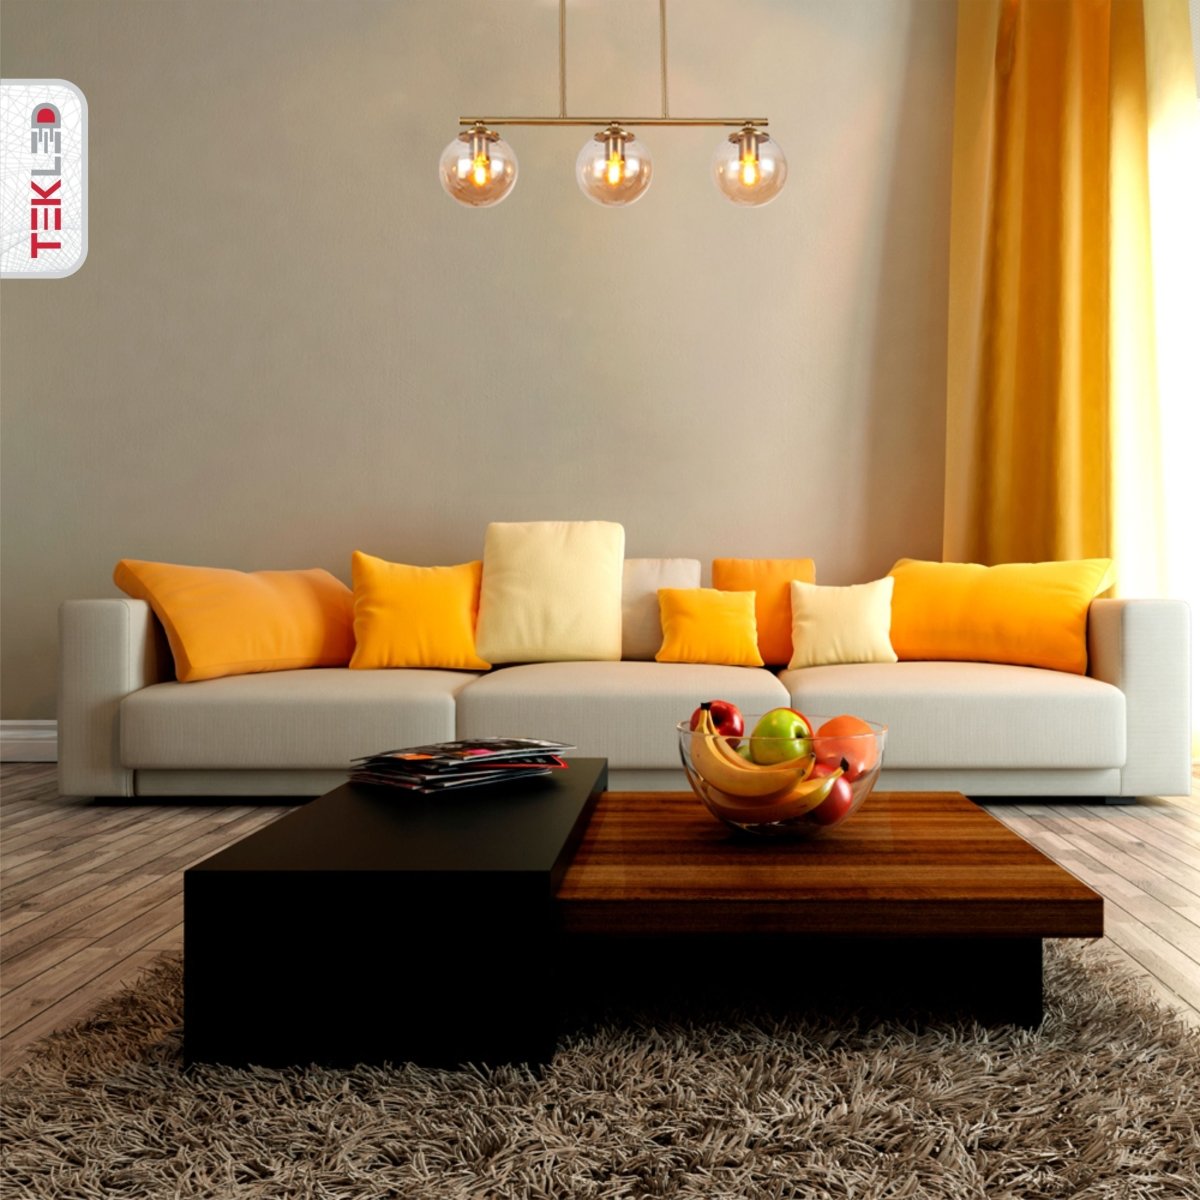 More interior usage of Amber Globe Glass Gold Metal Body Ceiling Light with 3xE27 Fitting | TEKLED 159-17578